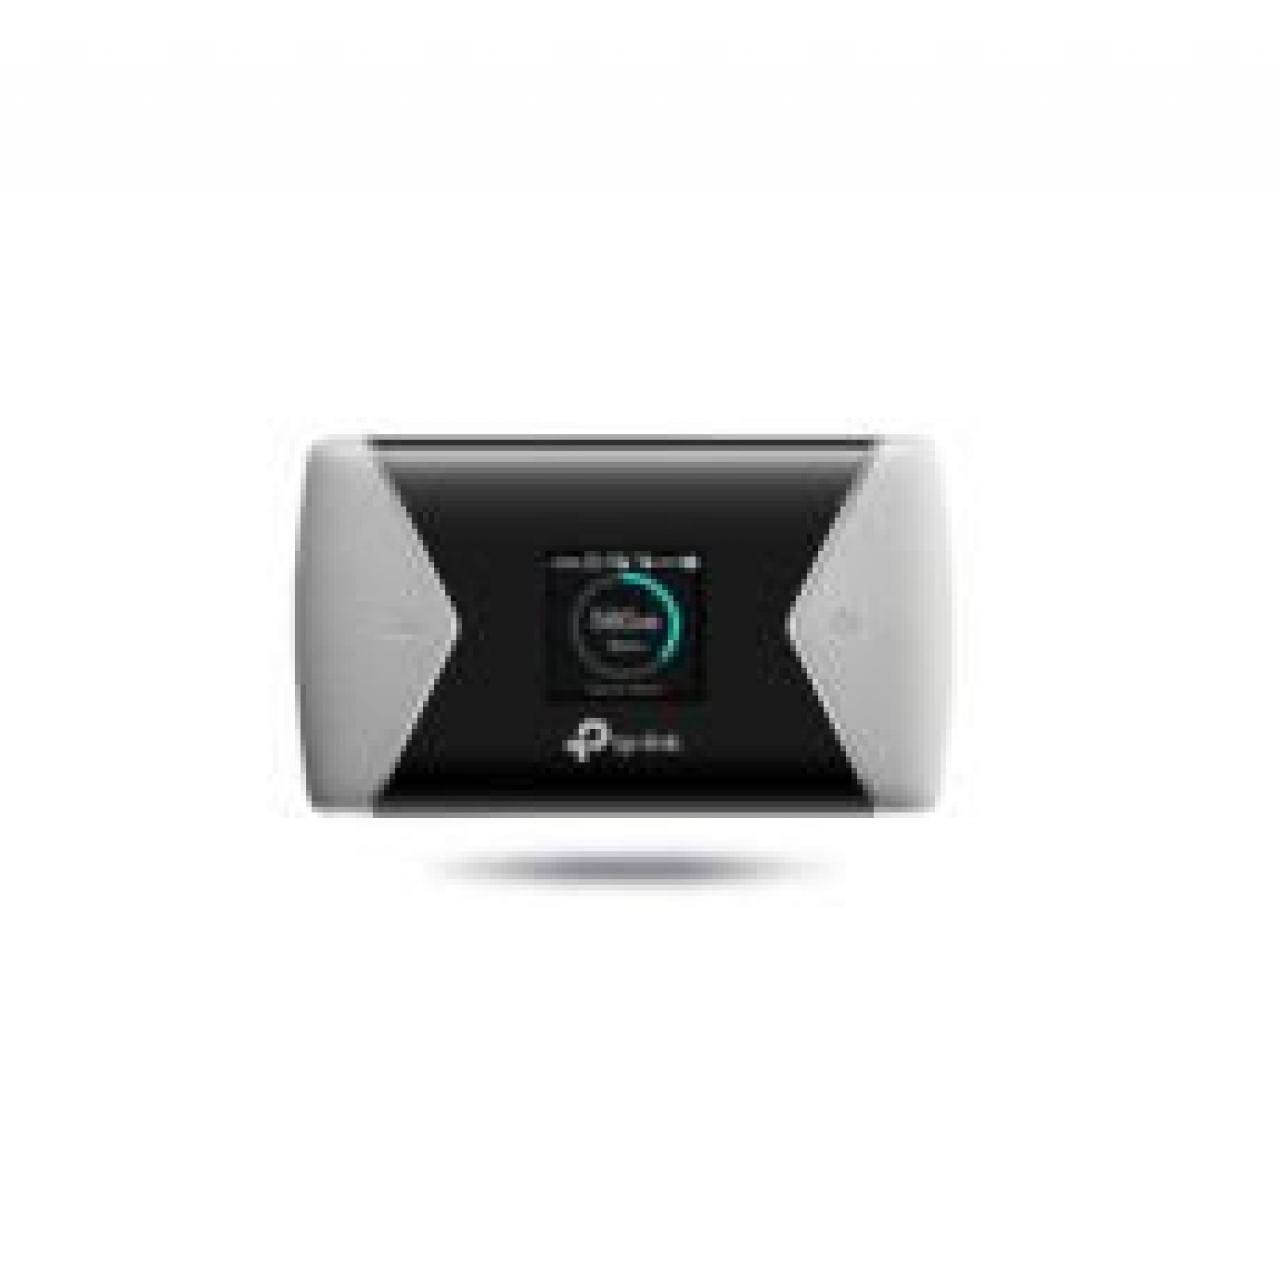 TP-LINK 3G-4G PORTABLE WI-FI SIM CARD ROUTER